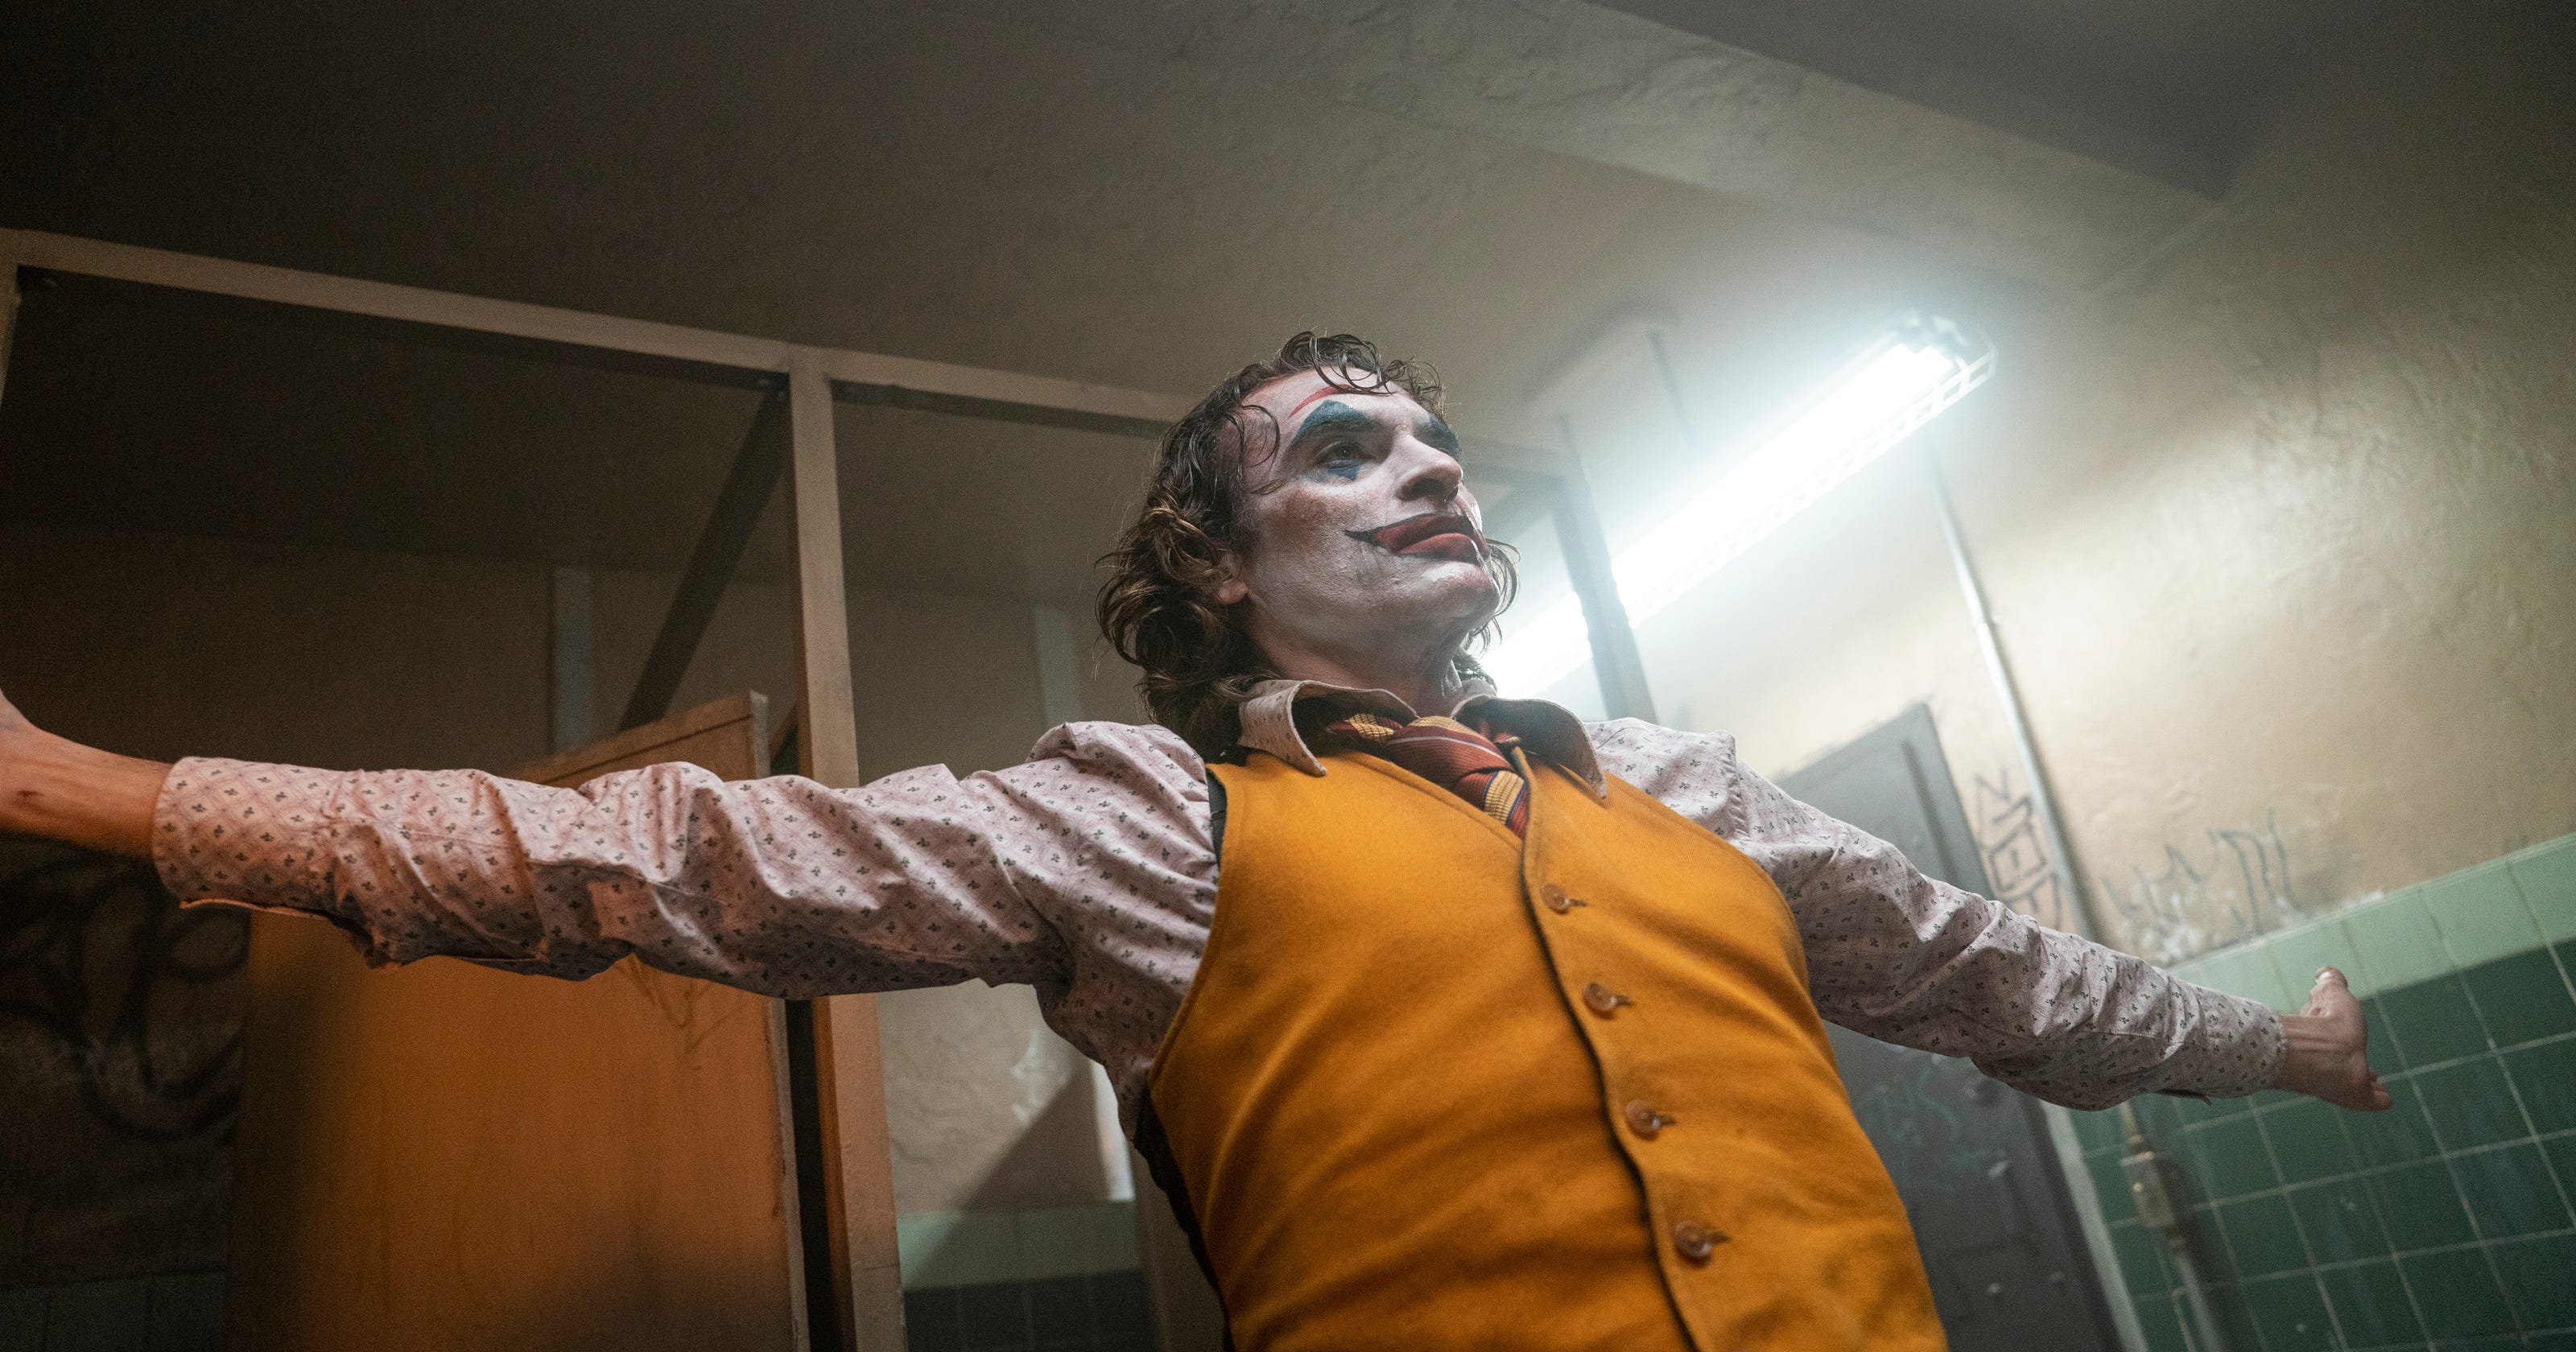 Oscar nominations 2020: 'Joker' leads with 11, including best picture